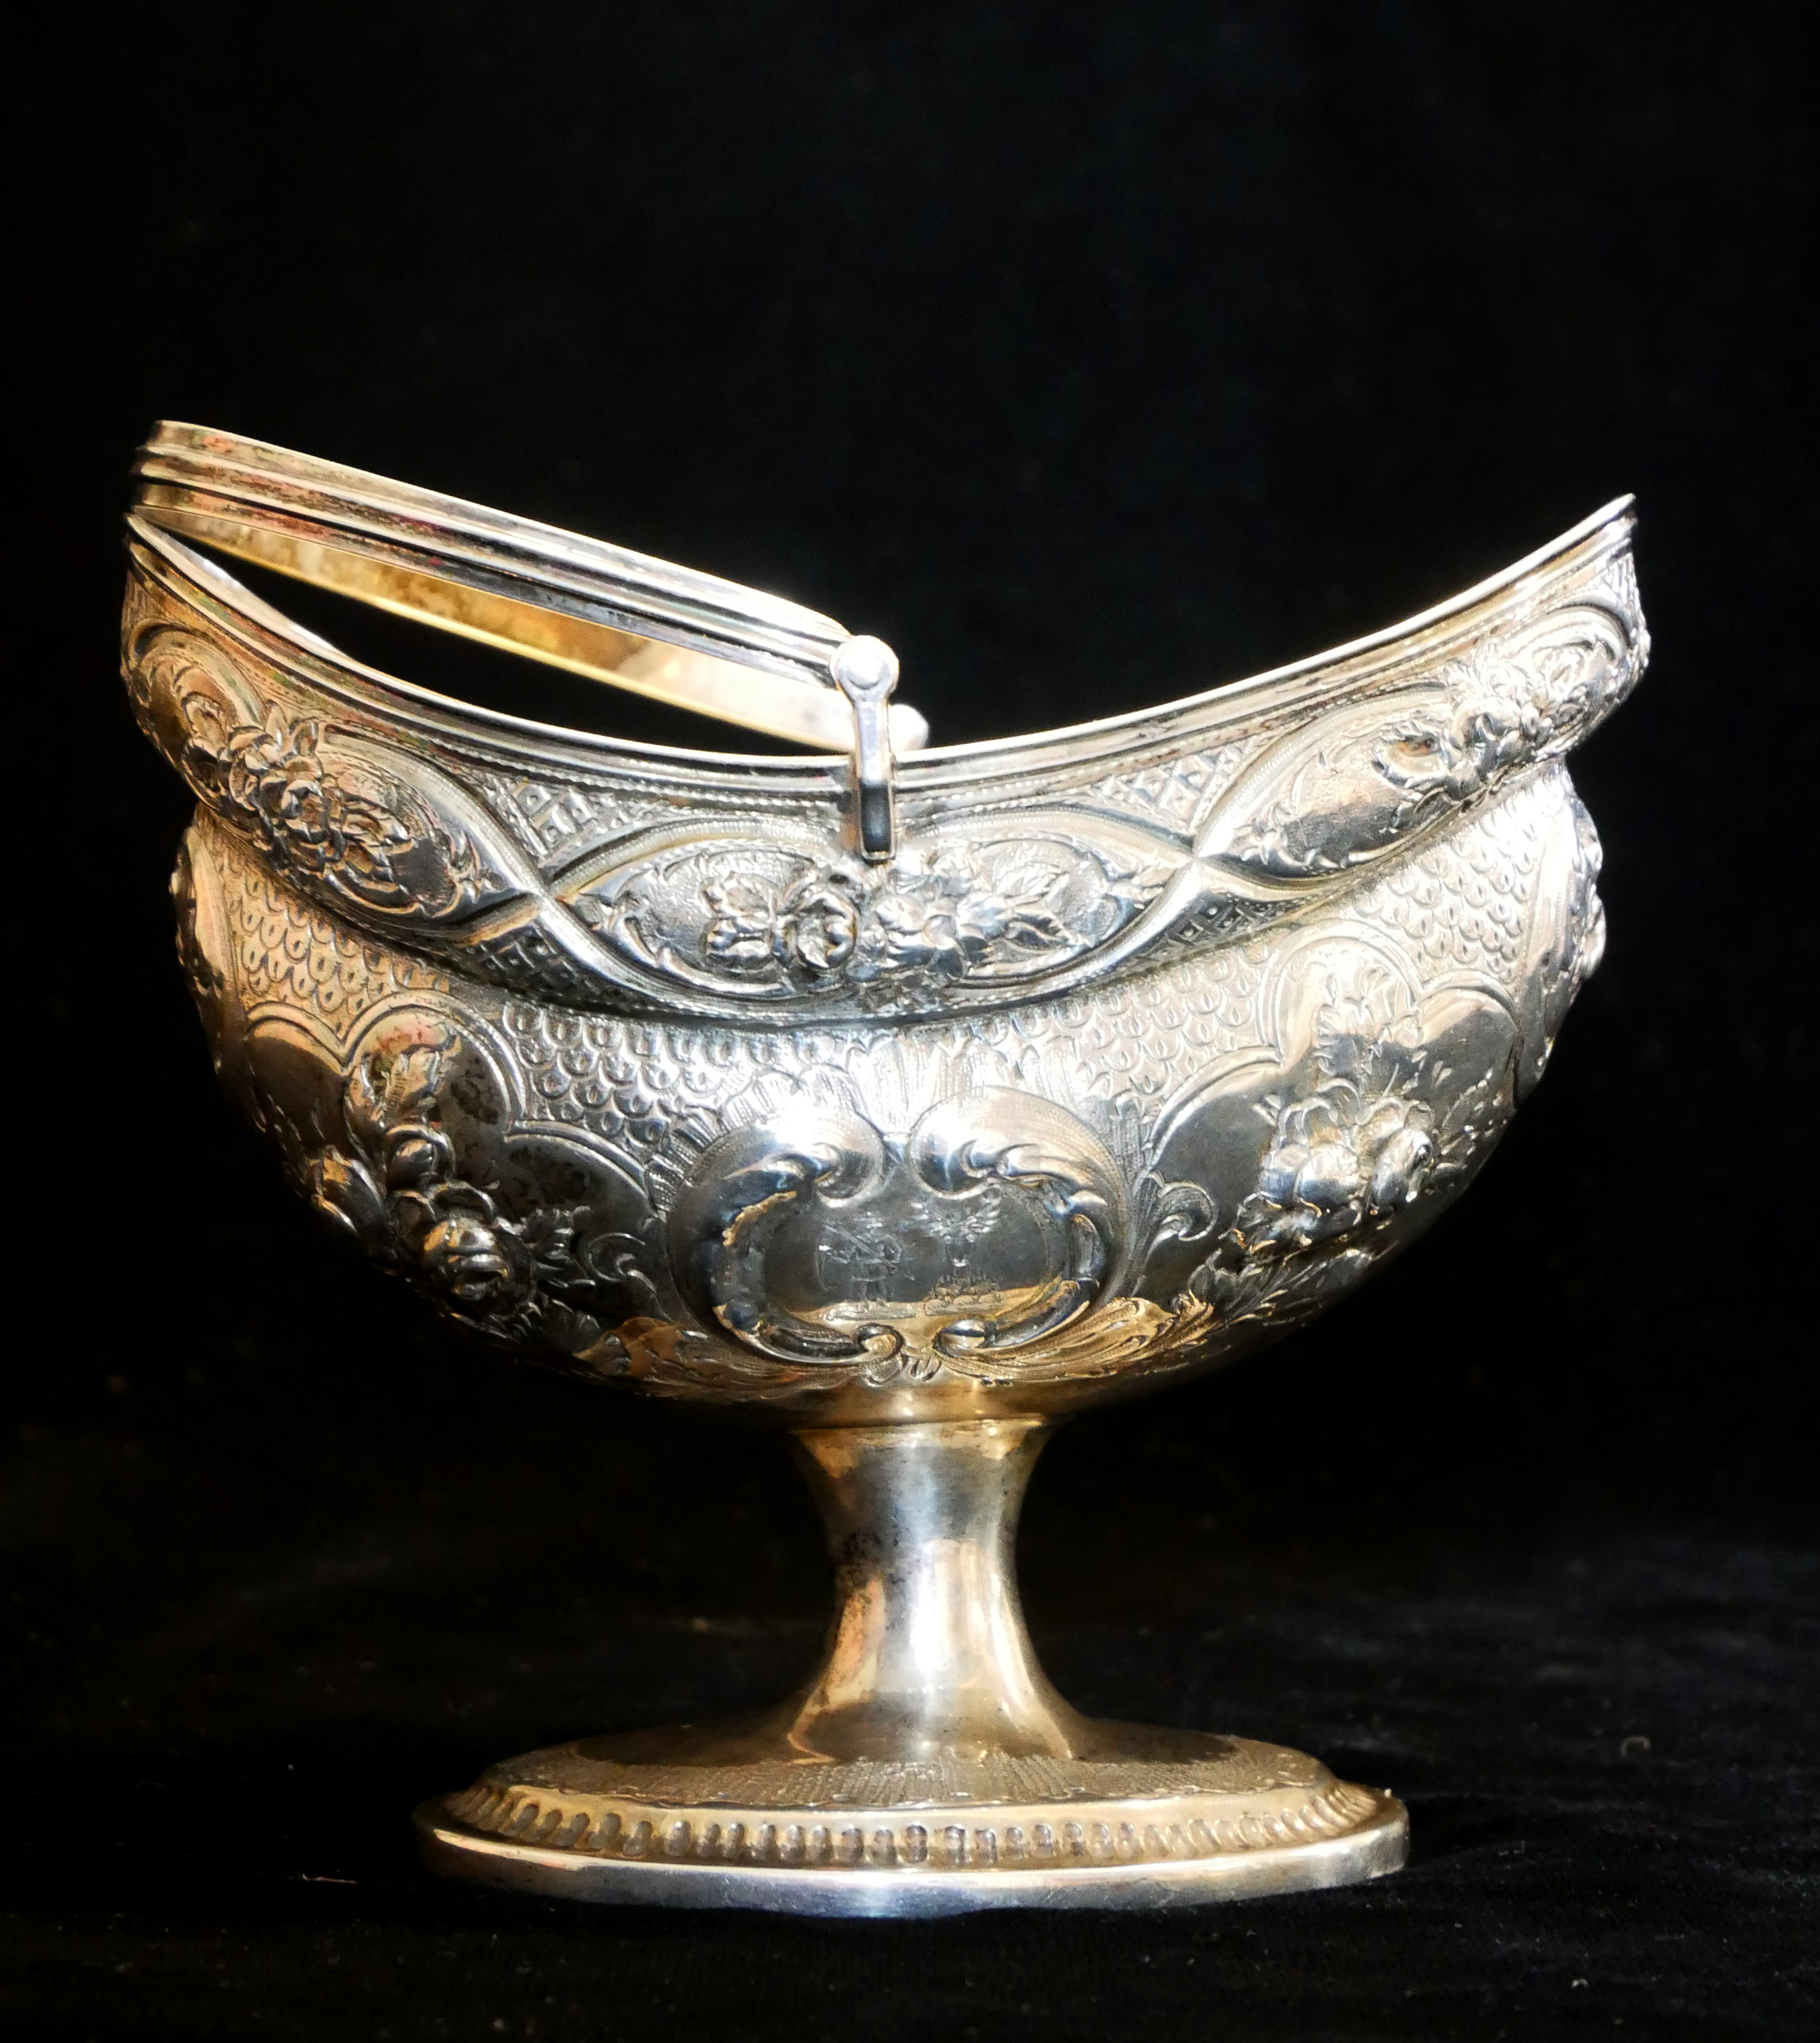 A GEORGIAN IRISH SILVER SWEETMEAT BASKET Having a swing handle, embossed floral decoration and